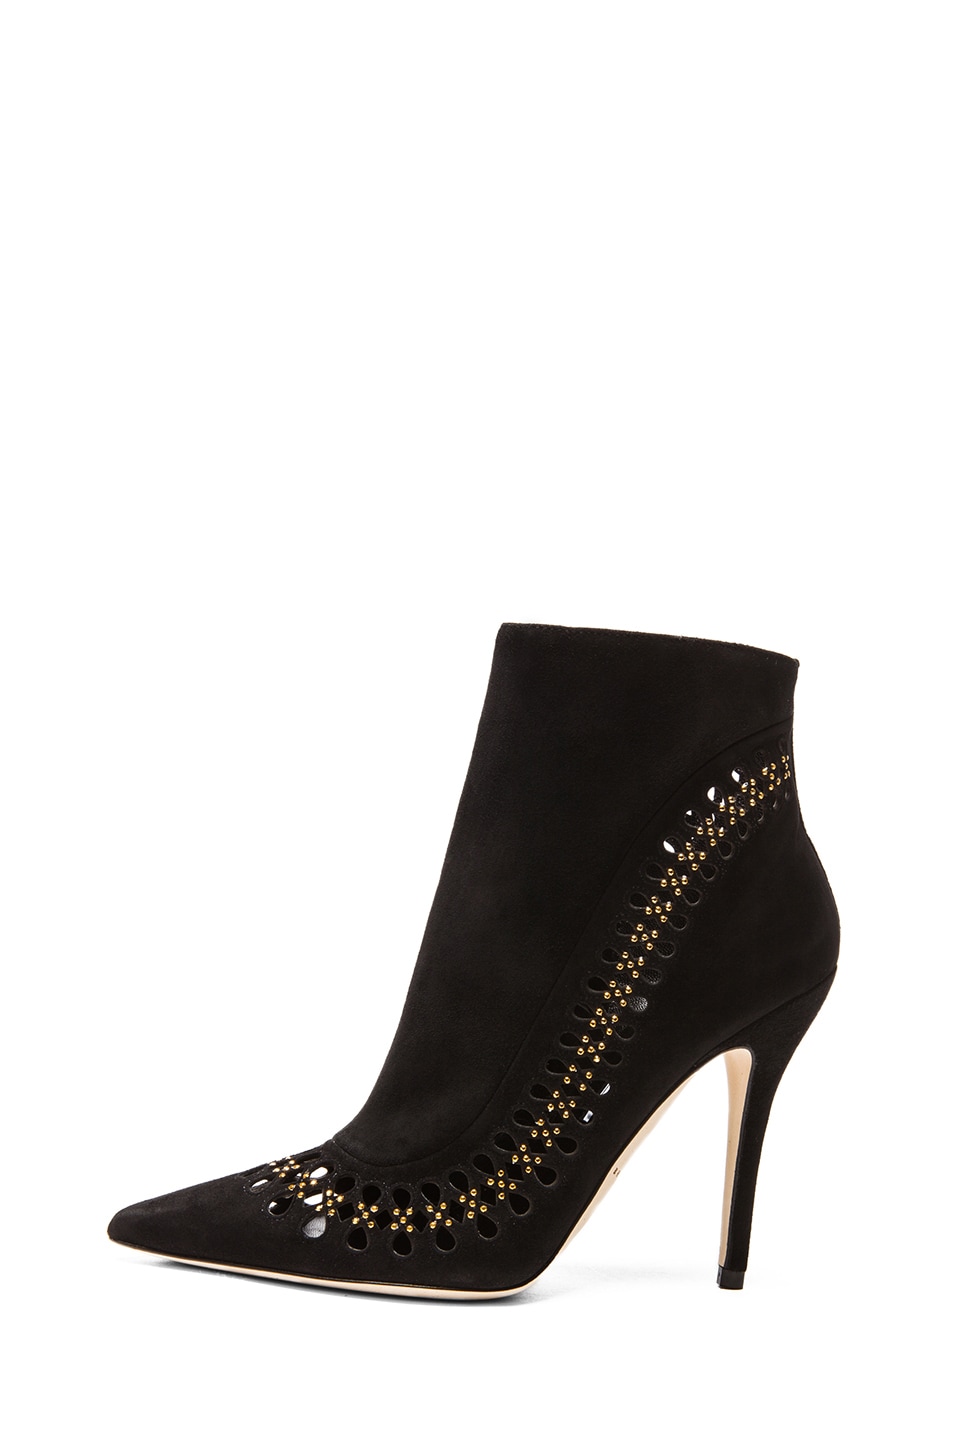 Image 1 of Brian Atwood Atena Suede Booties in Black Suede